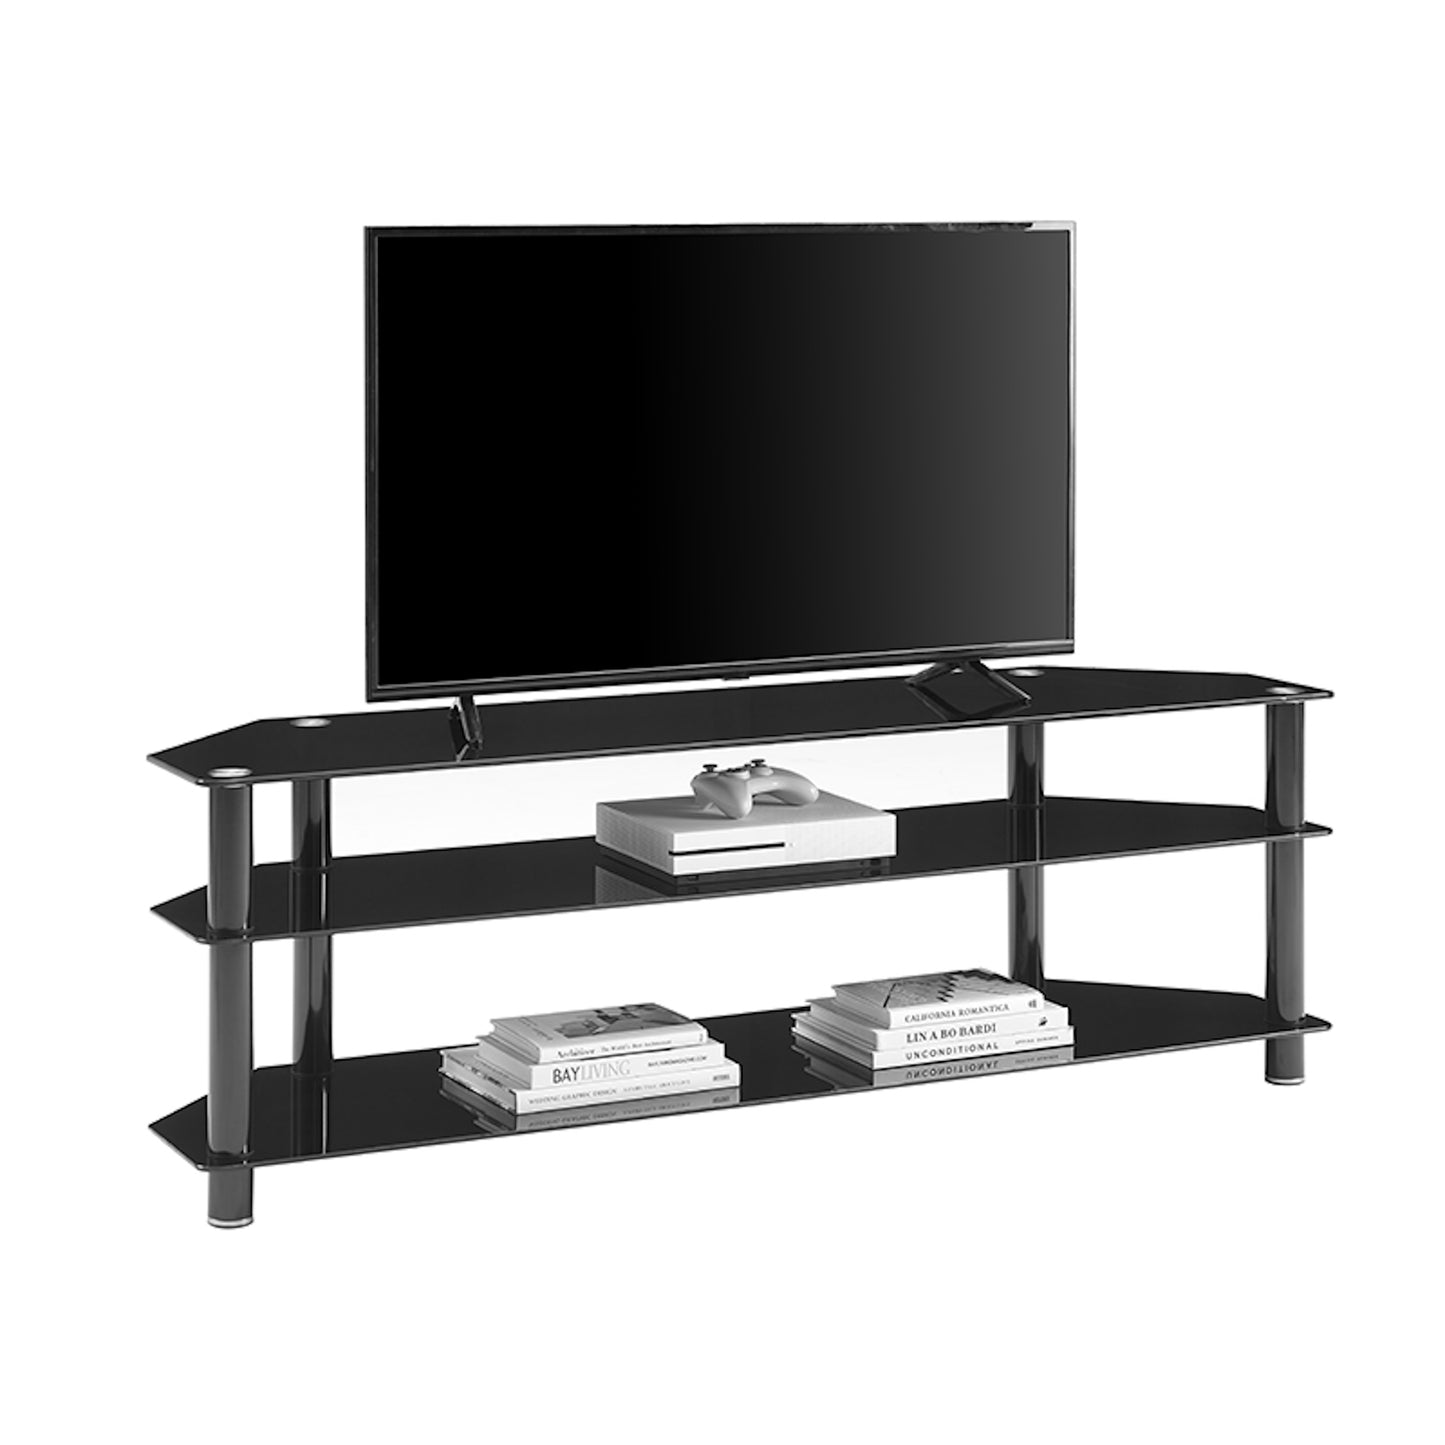 Tauris ACE Entertainment Center, TV Stand, Entertainment Unit 1500mm Tempered Glass and Steel Unit Black